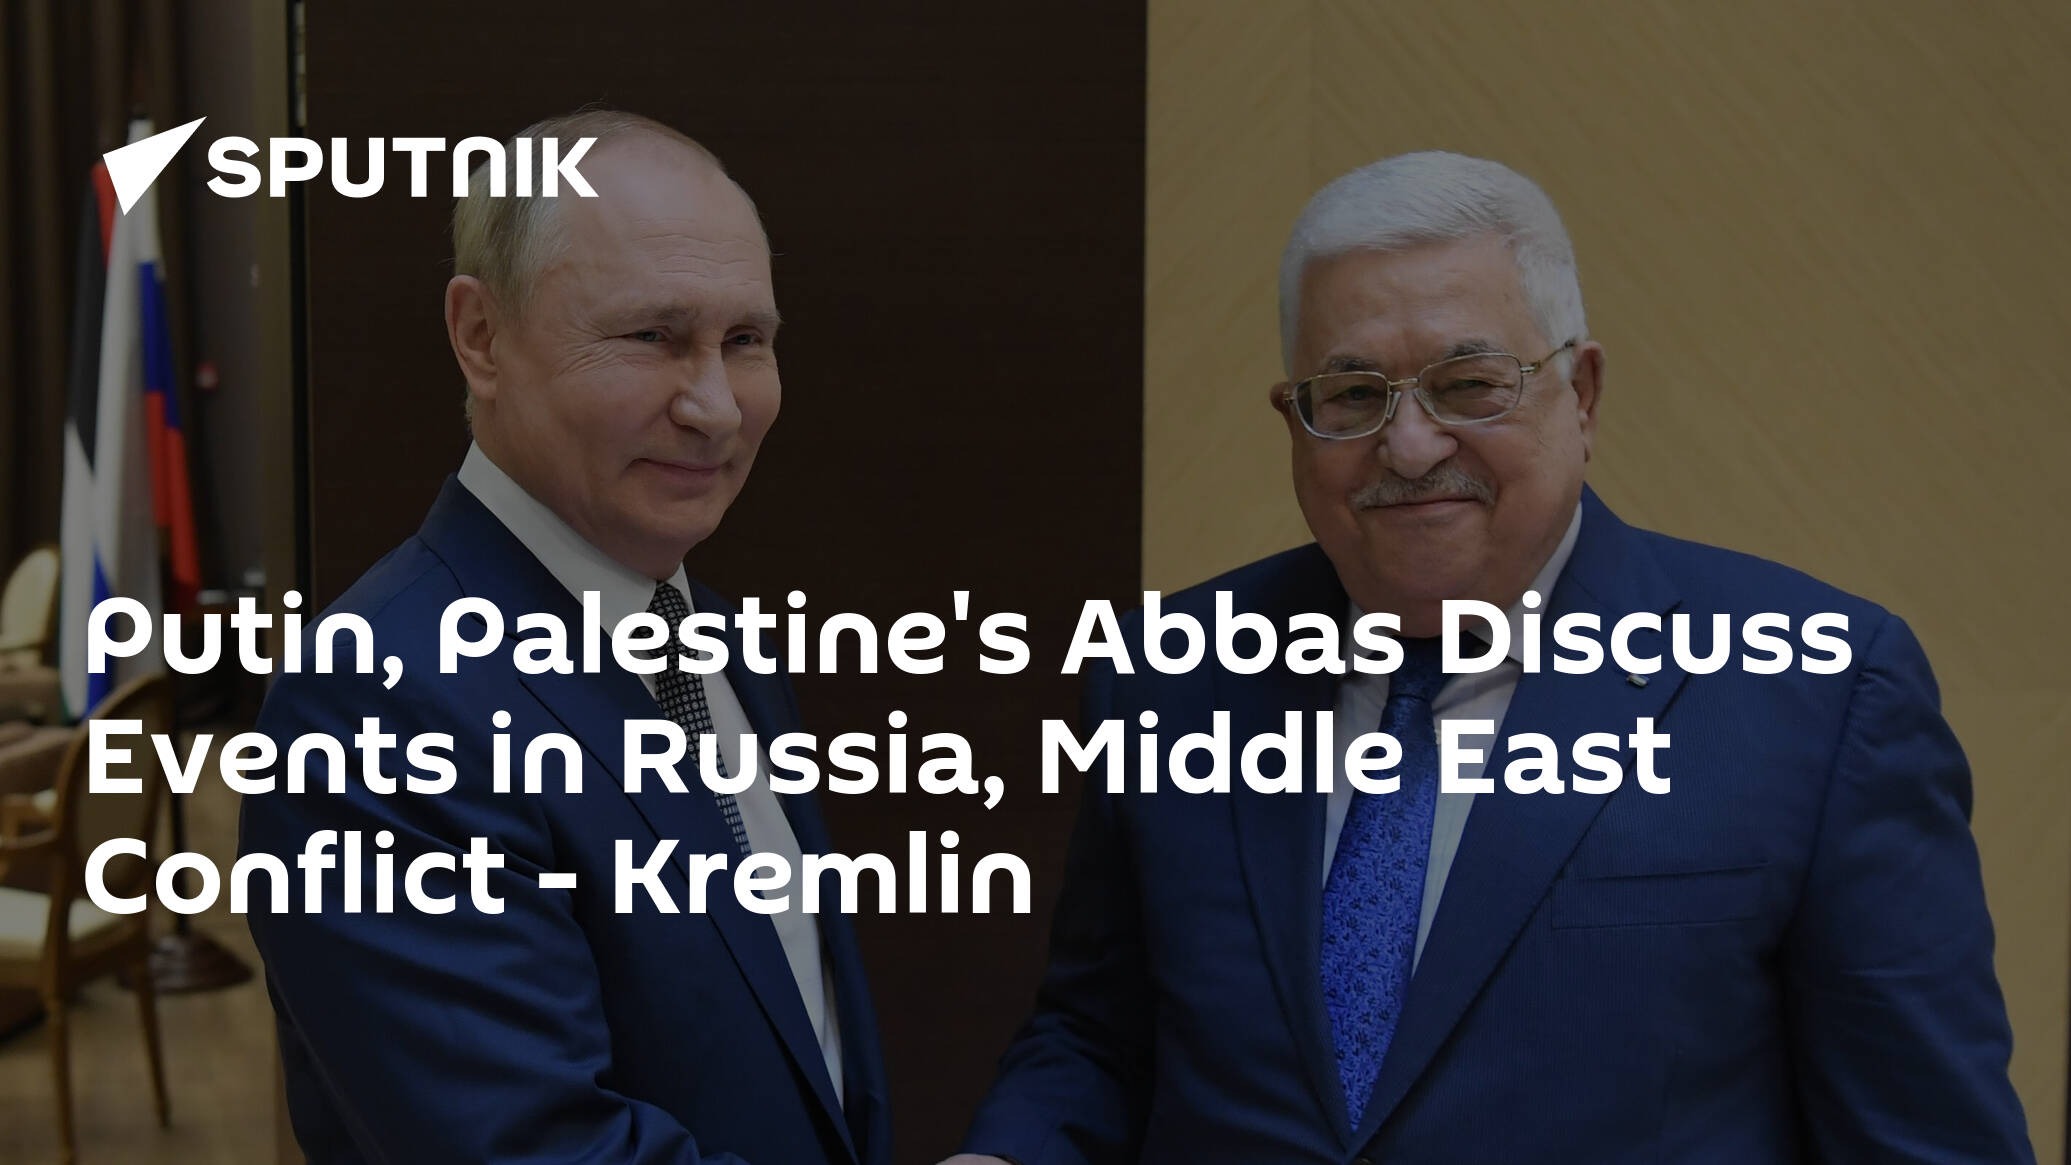 Putin, Palestine's Abbas Discuss Events in Russia, Middle East Conflict – Kremlin